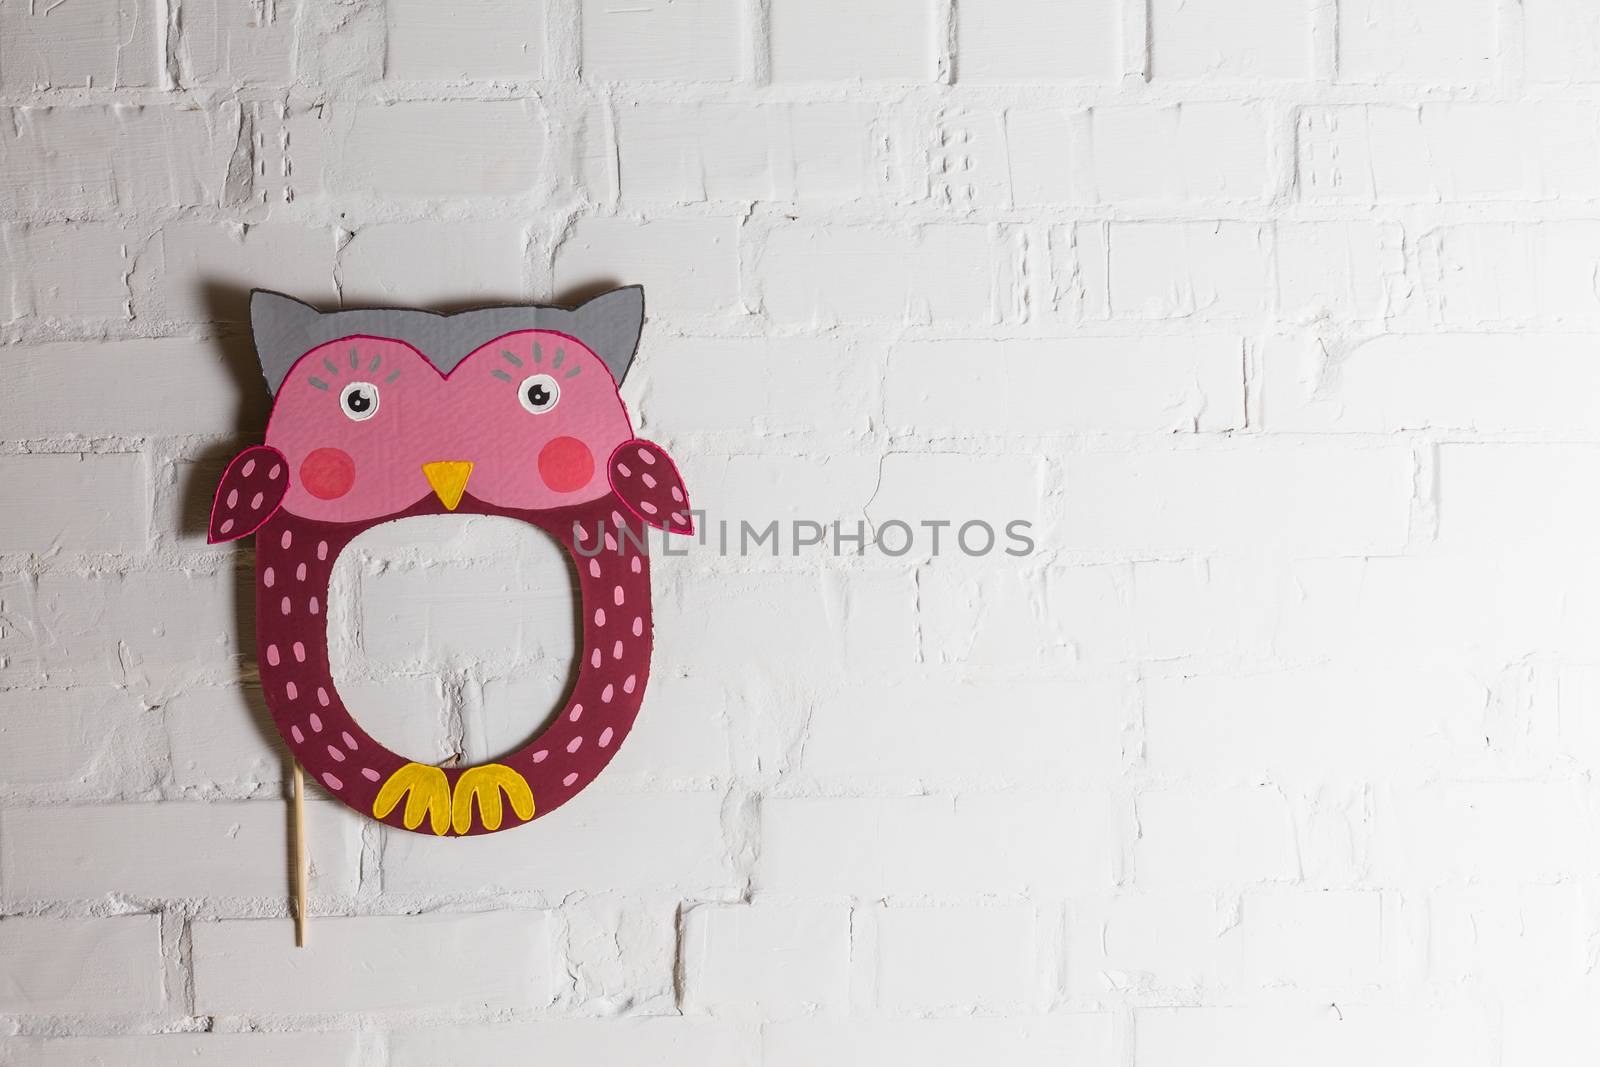 Bright cardboard mask on a white brick wall. Consept card. Owl